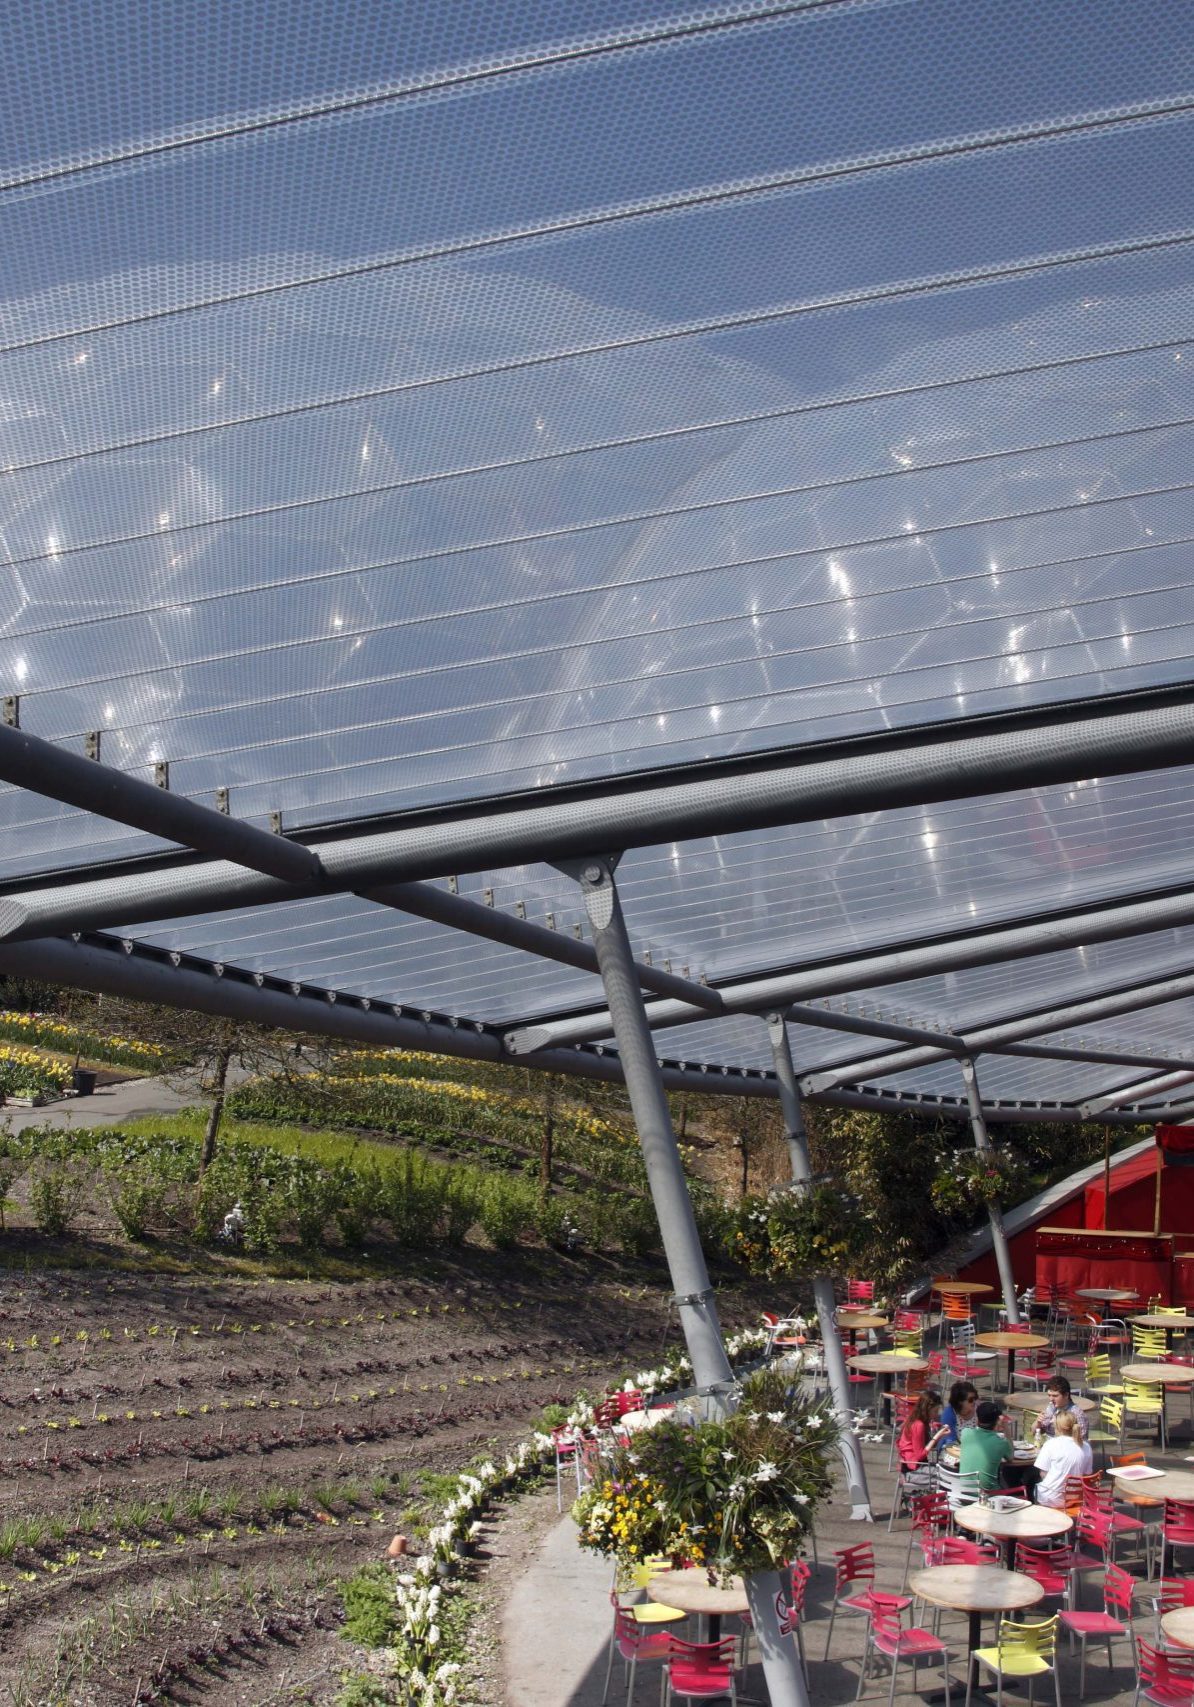 Eden Project Stressed Skin Membrane Canopy